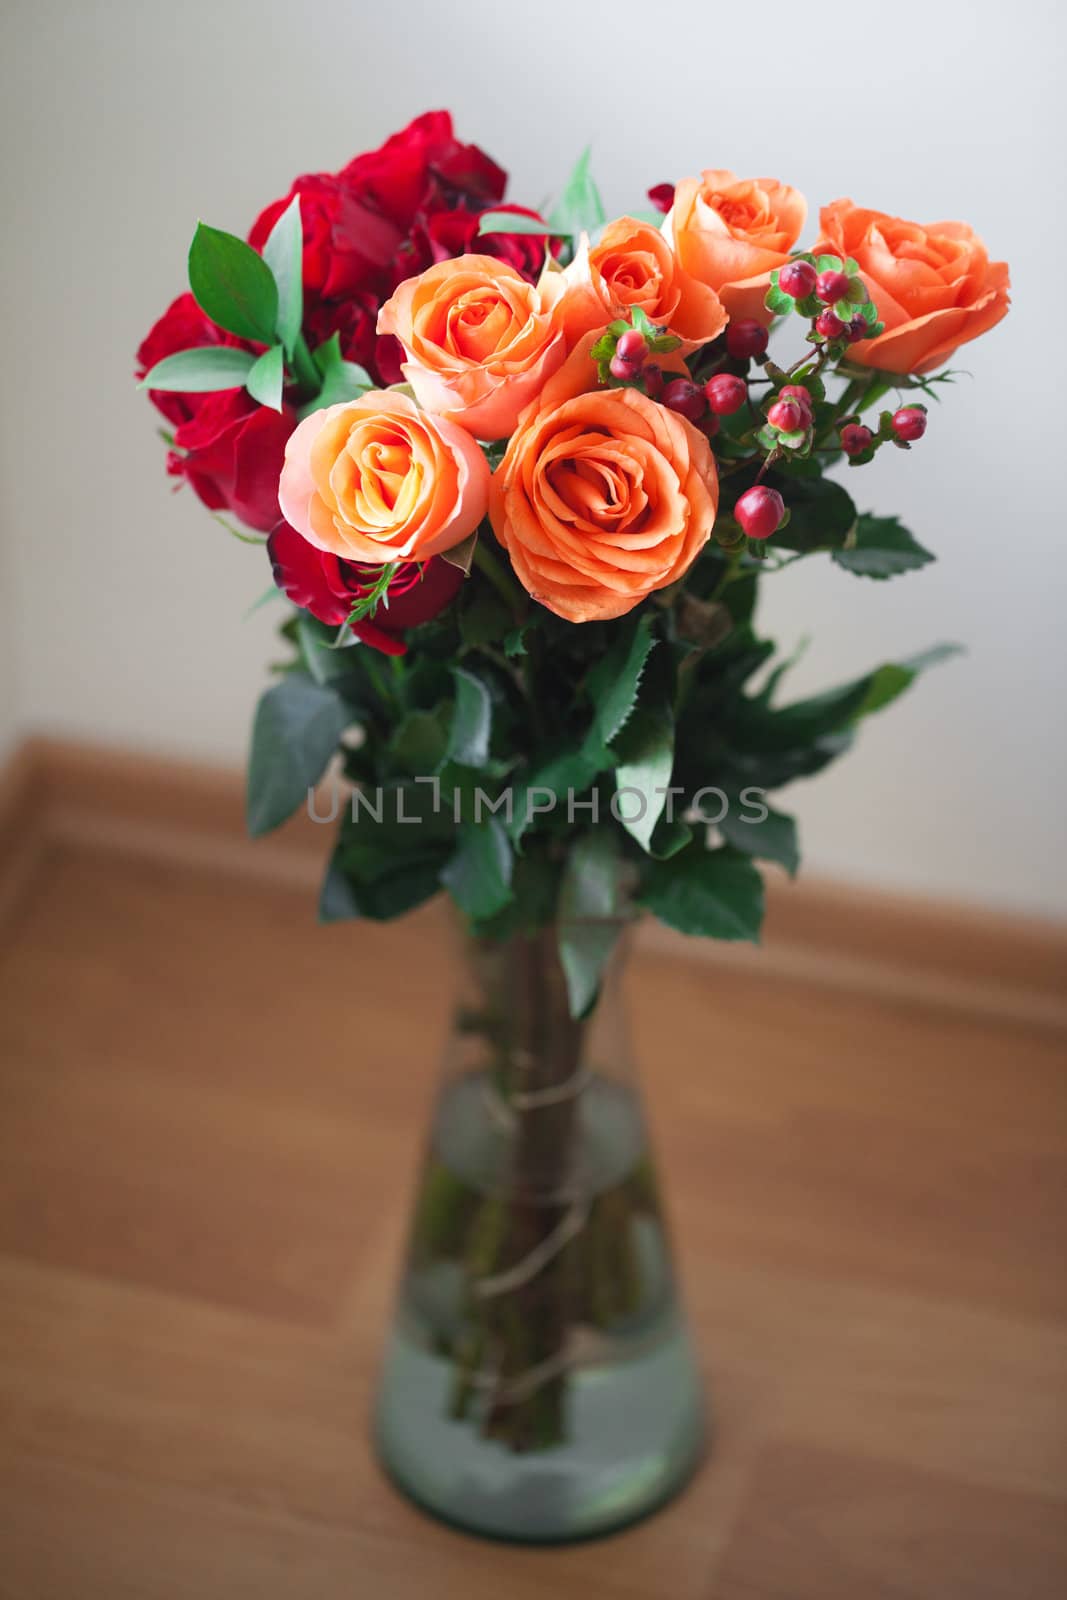 bouquet of colorful roses in a vase on white background by jannyjus